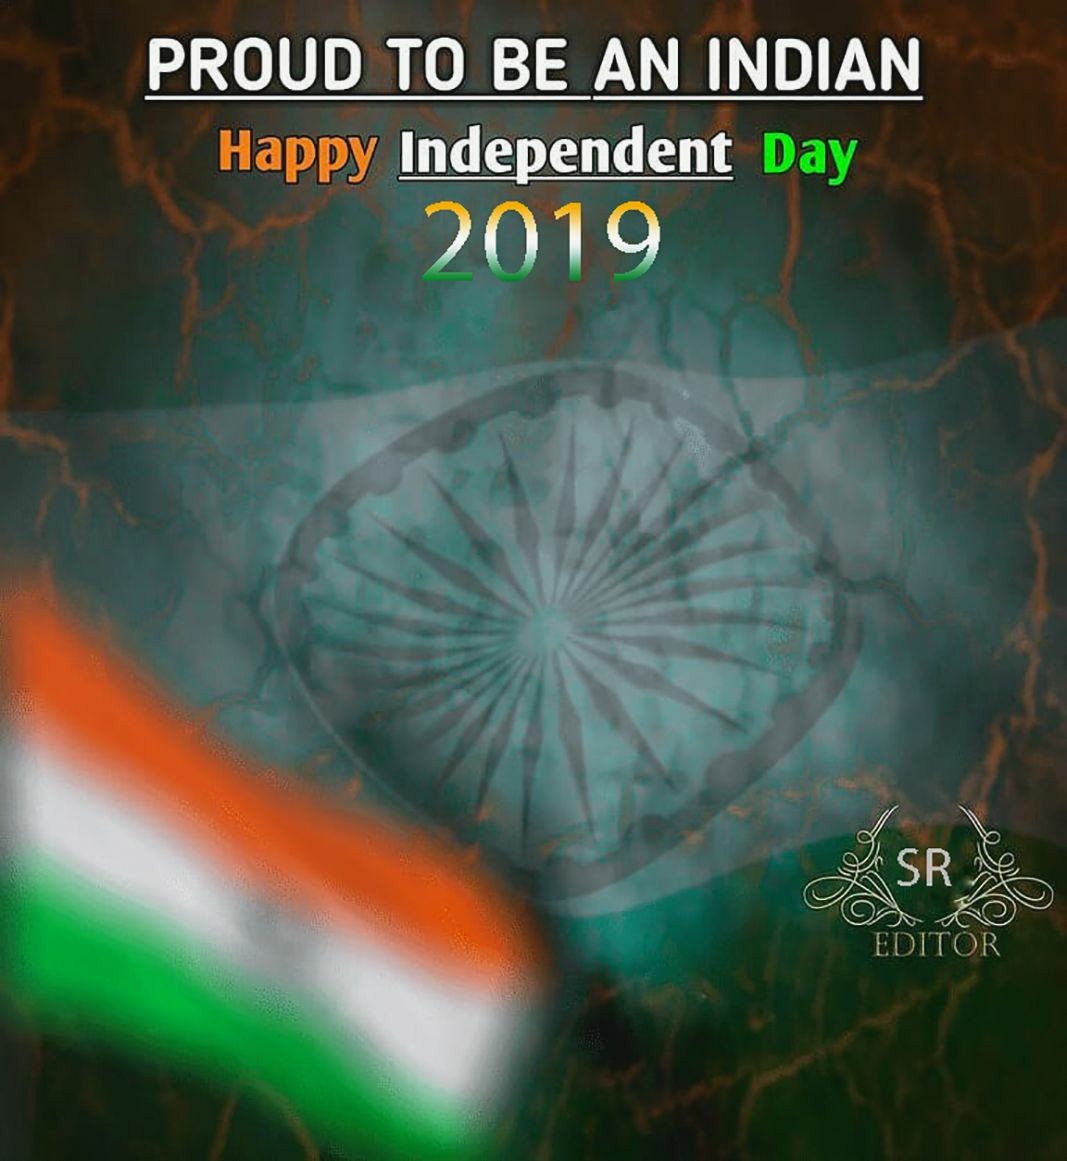 15 August 2019 Wallpaper - Independence Day 2019 Background - HD Wallpaper 